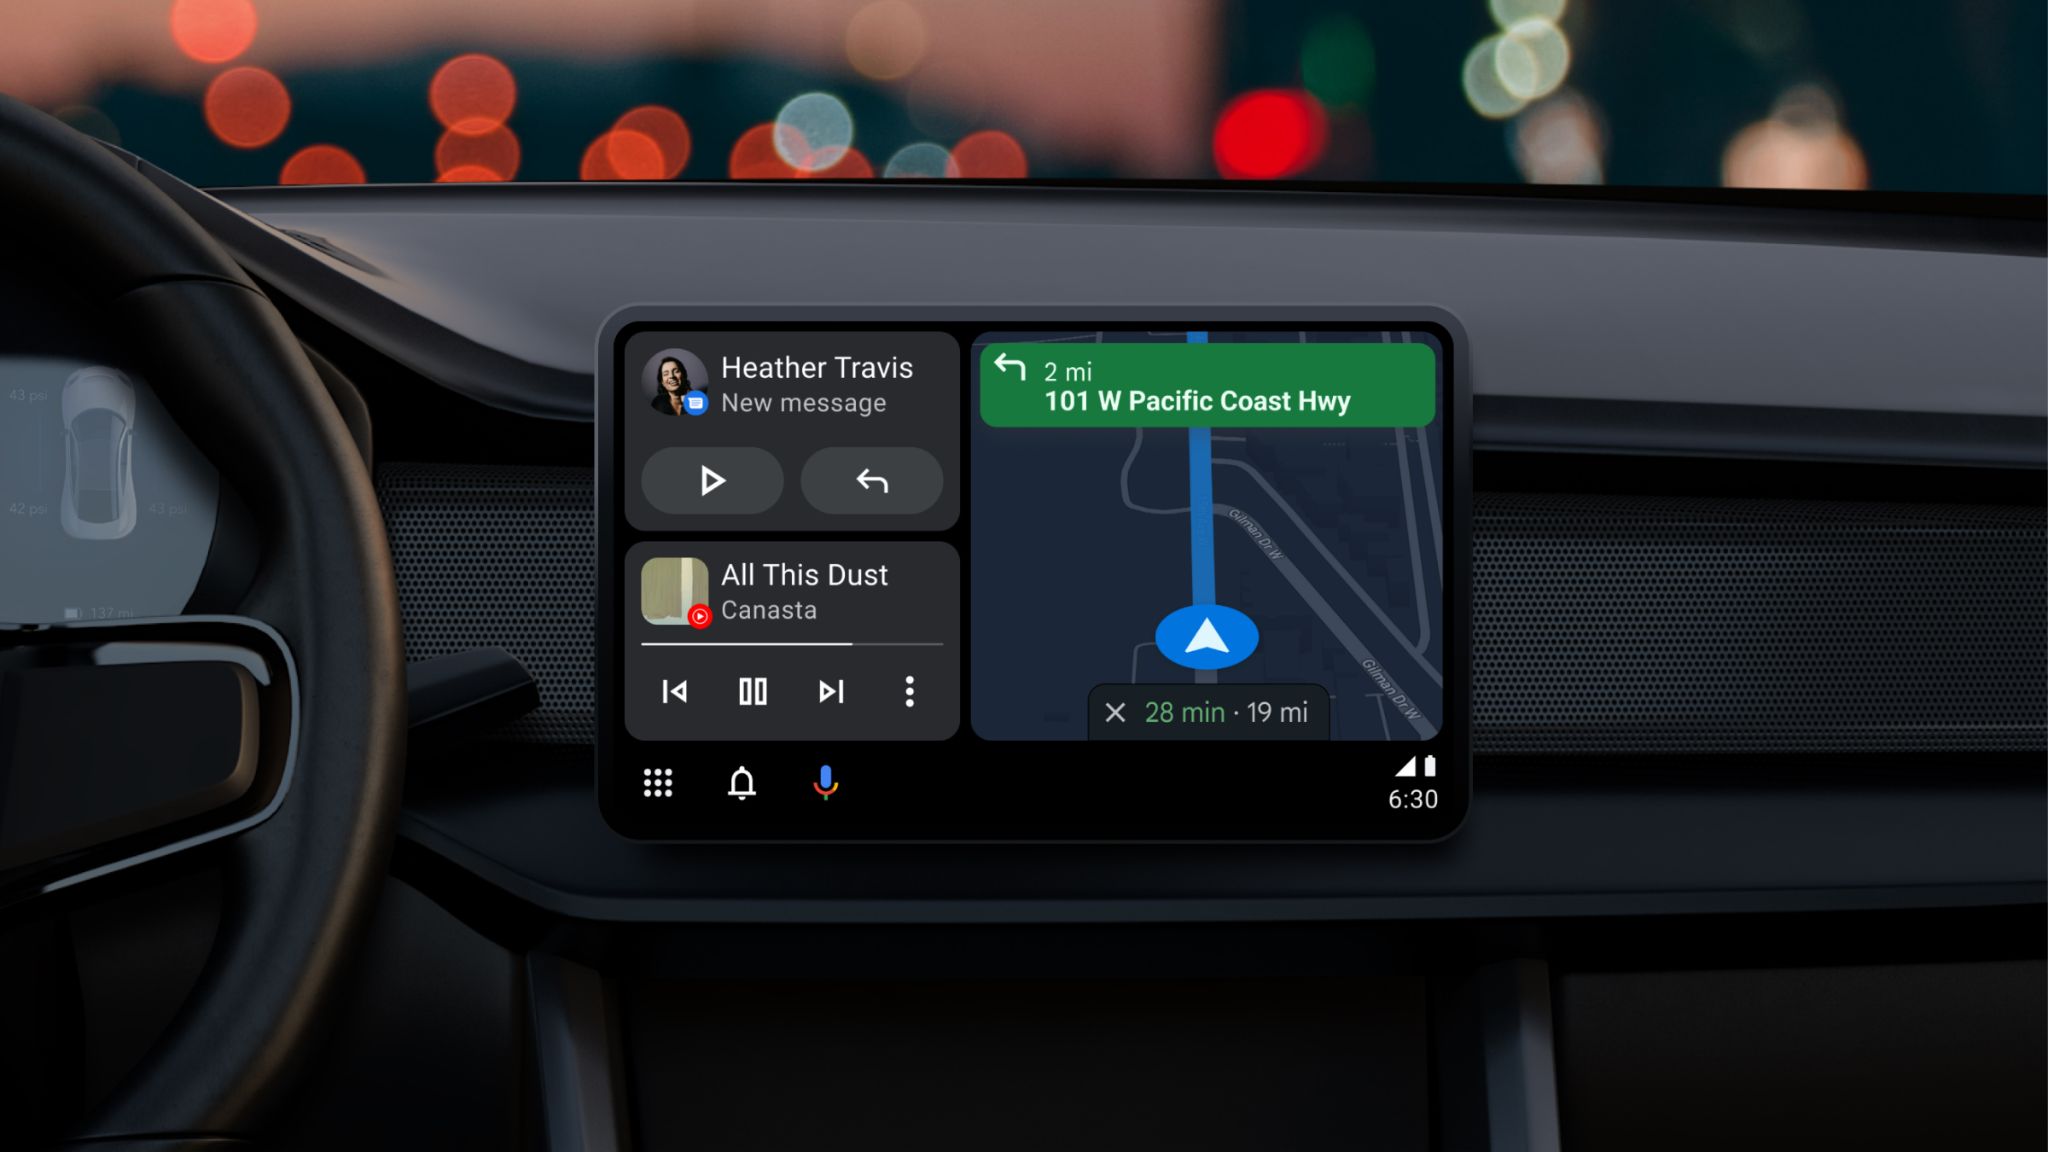 New Android Auto UI shown on a landscape display on the dash of a car